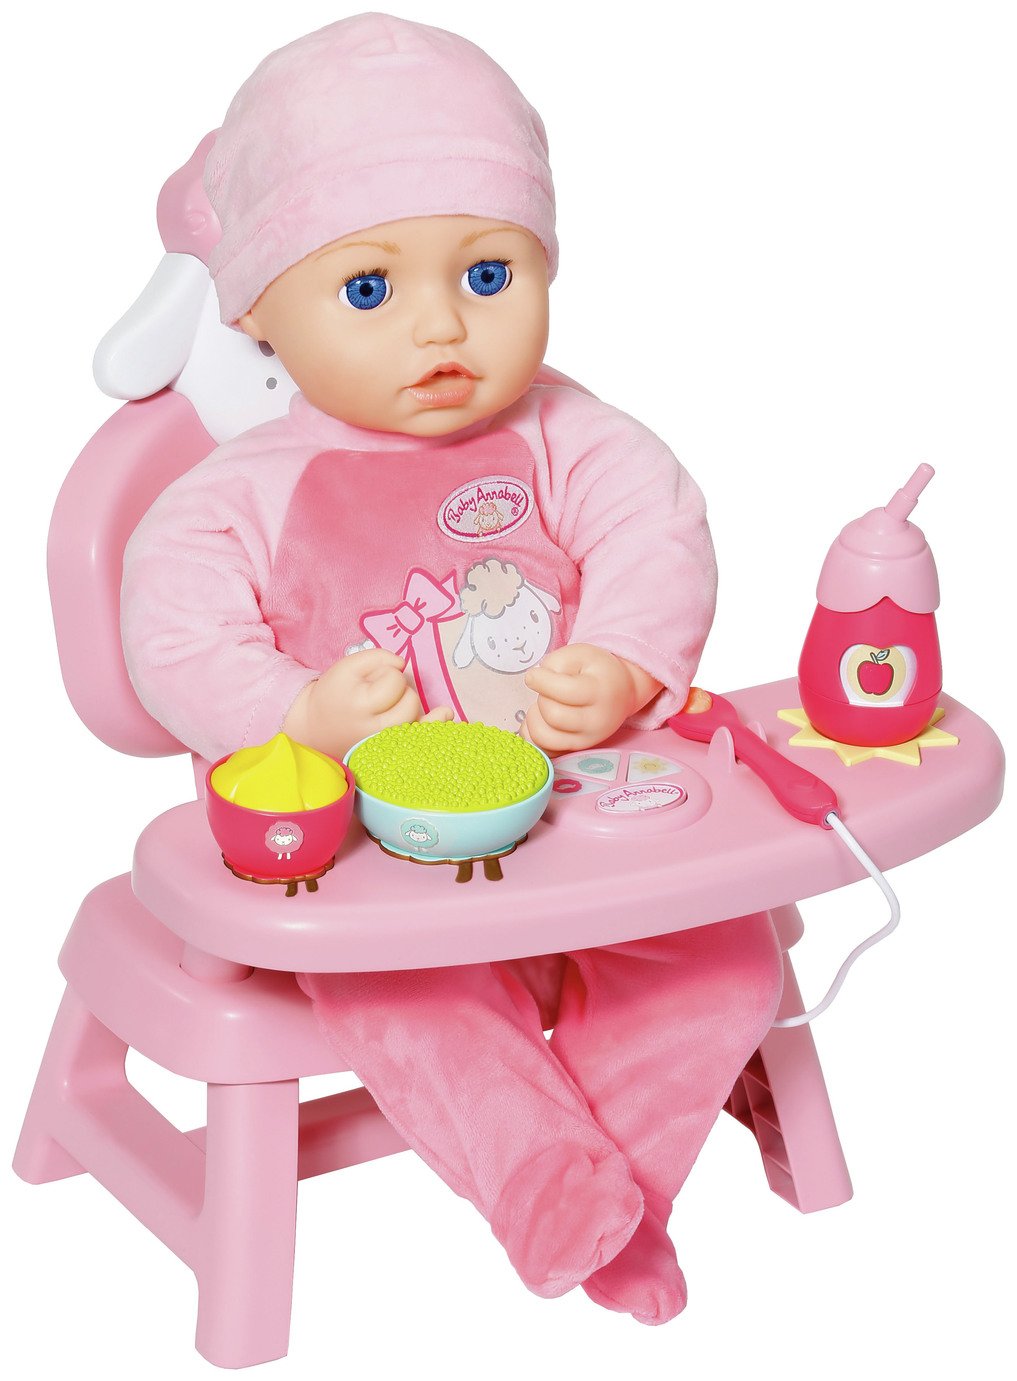 BABY Annabell Lunch Time Table